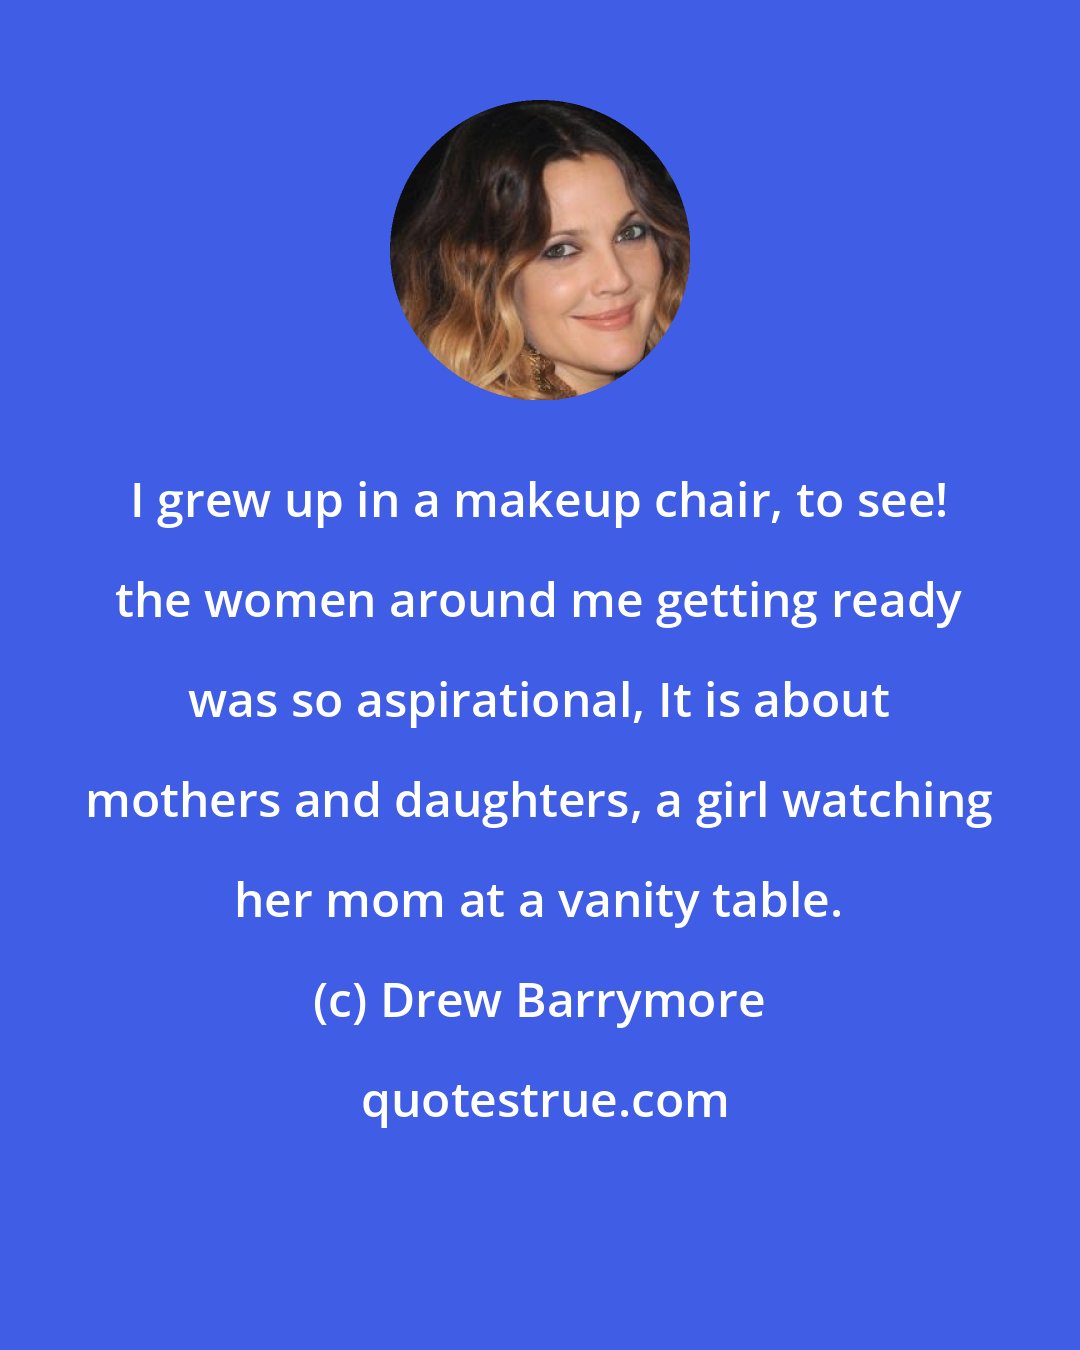 Drew Barrymore: I grew up in a makeup chair, to see! the women around me getting ready was so aspirational, It is about mothers and daughters, a girl watching her mom at a vanity table.